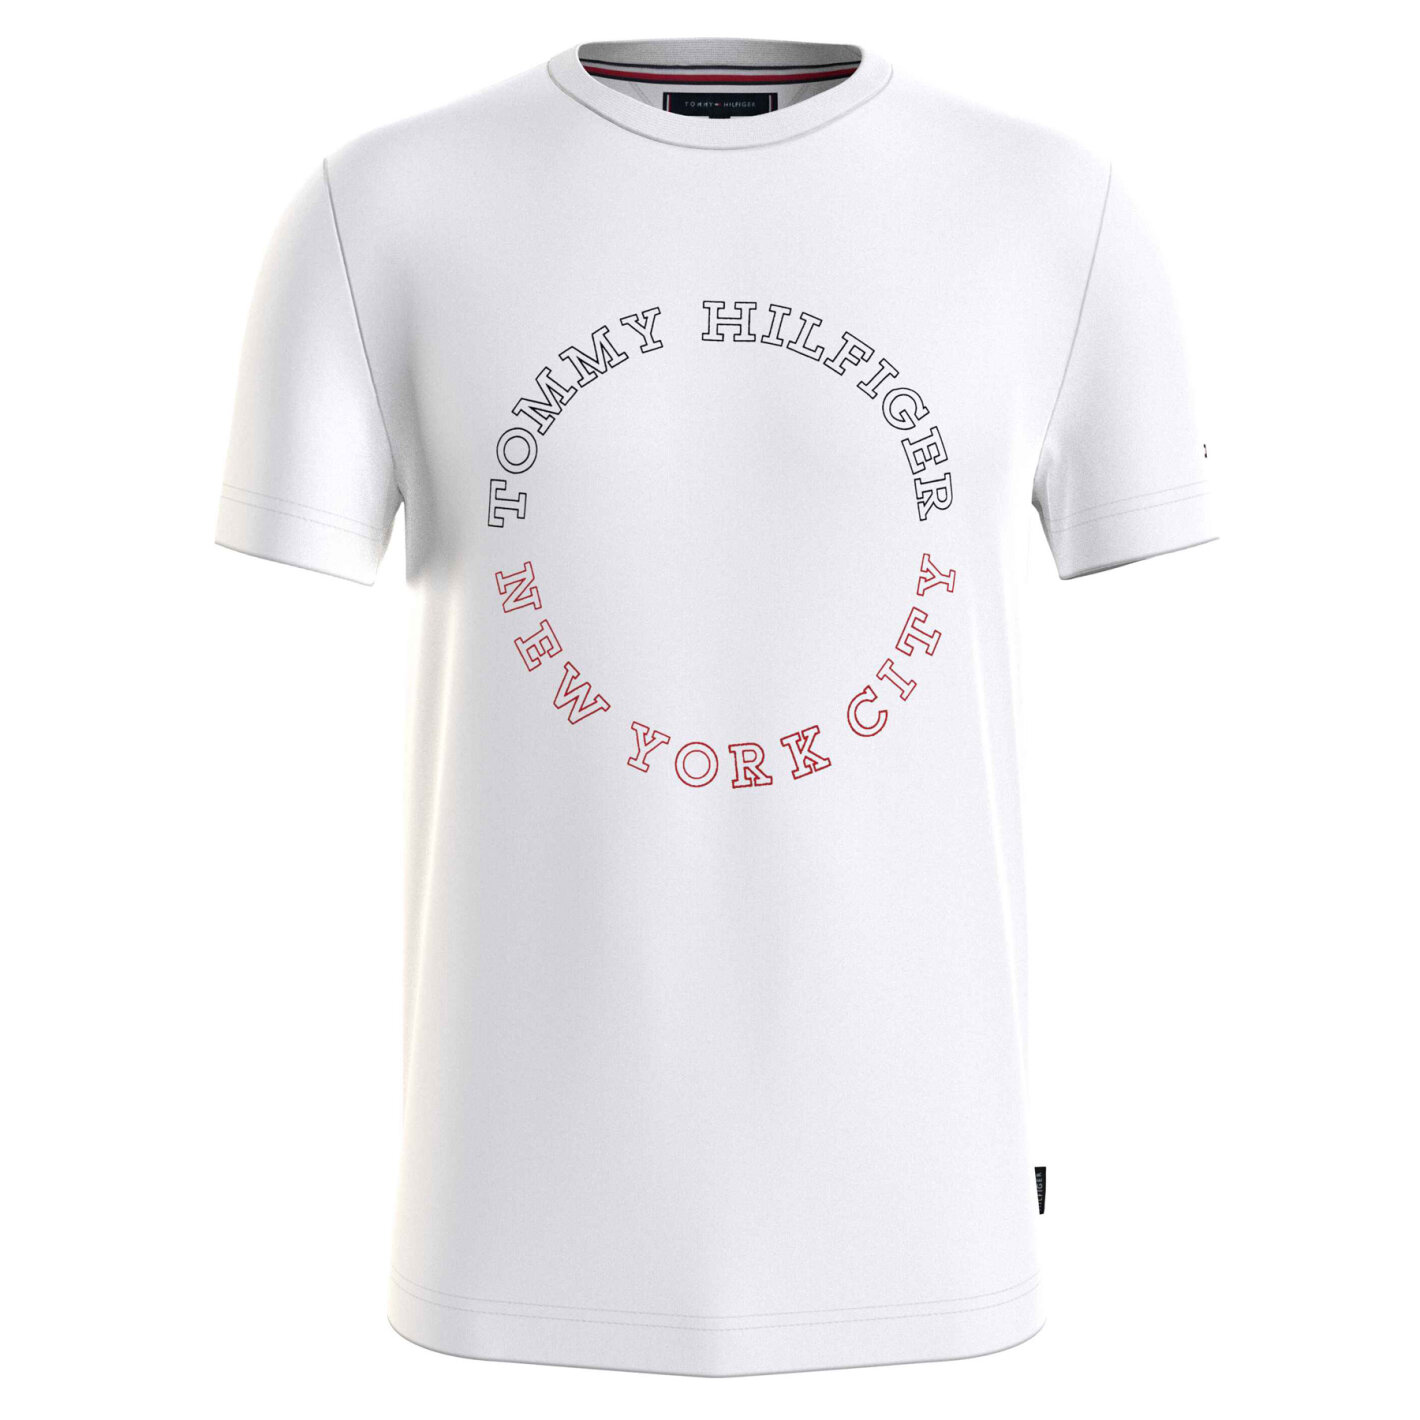 T-shirt - Fragt White roundle Hilfiger Fri monotype TH Tommy tee